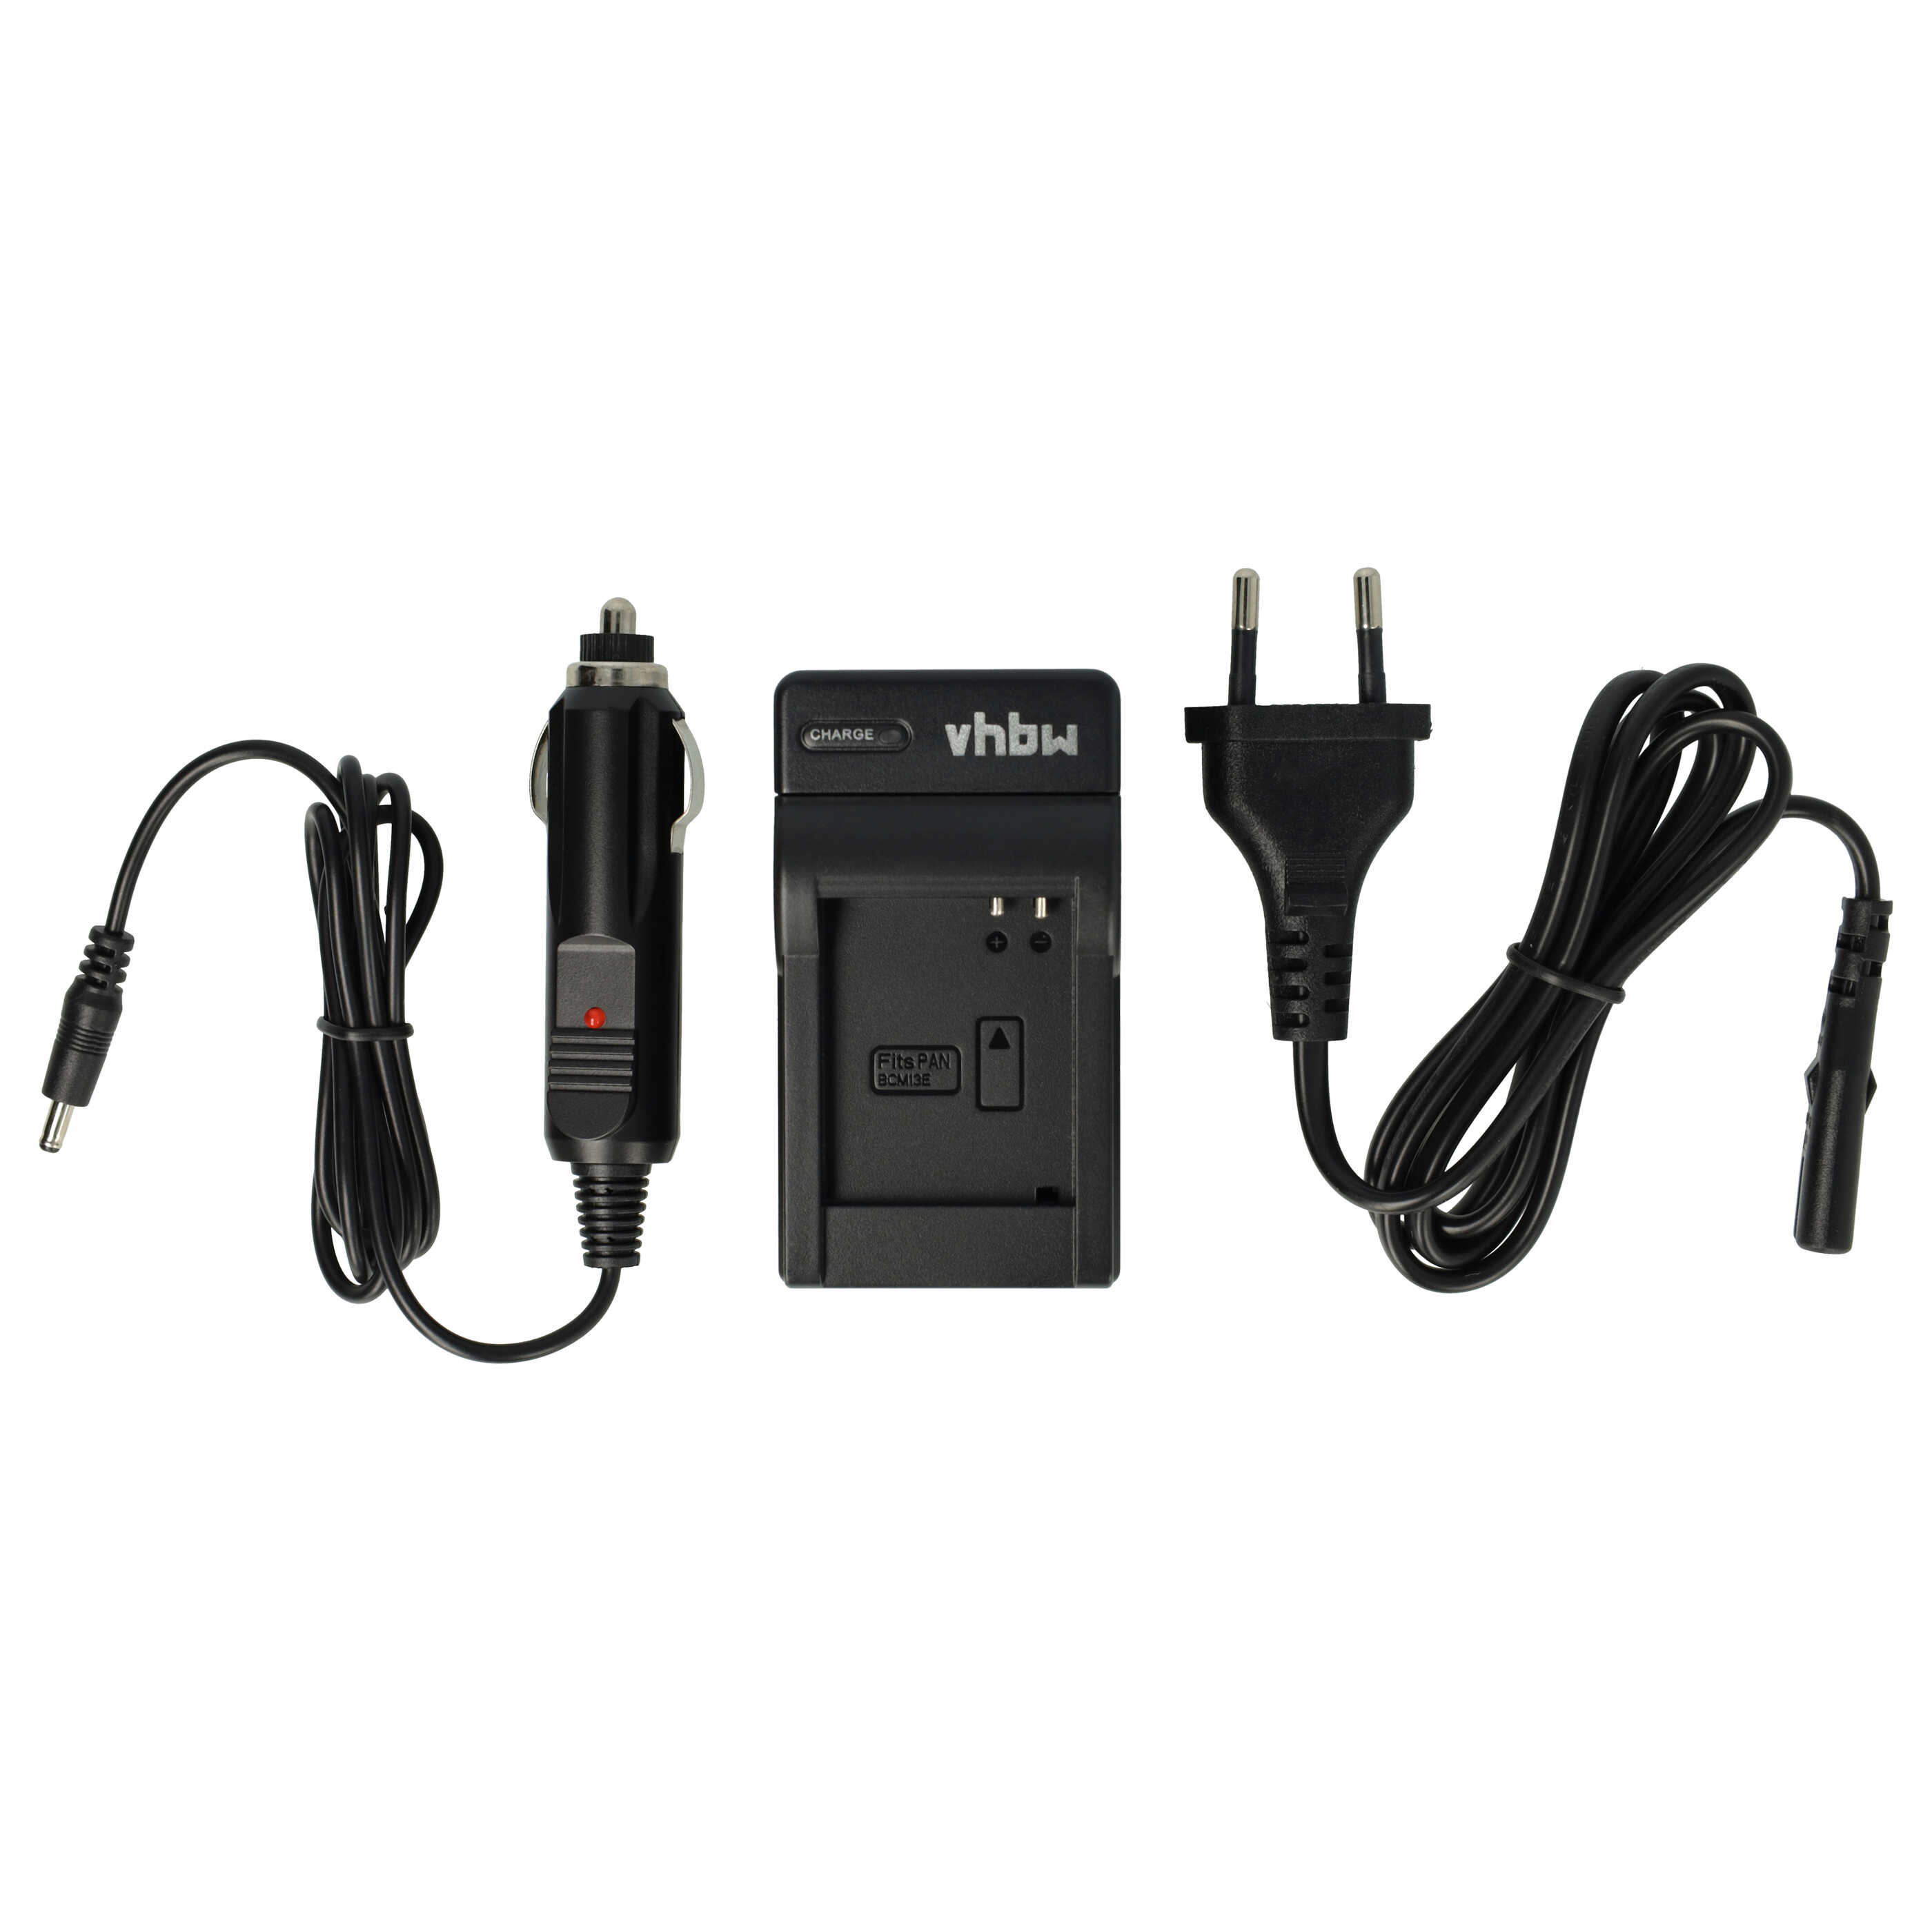 Battery Charger suitable for Lumix DMC-FT7 Camera etc. - 0.6 A, 4.2 V